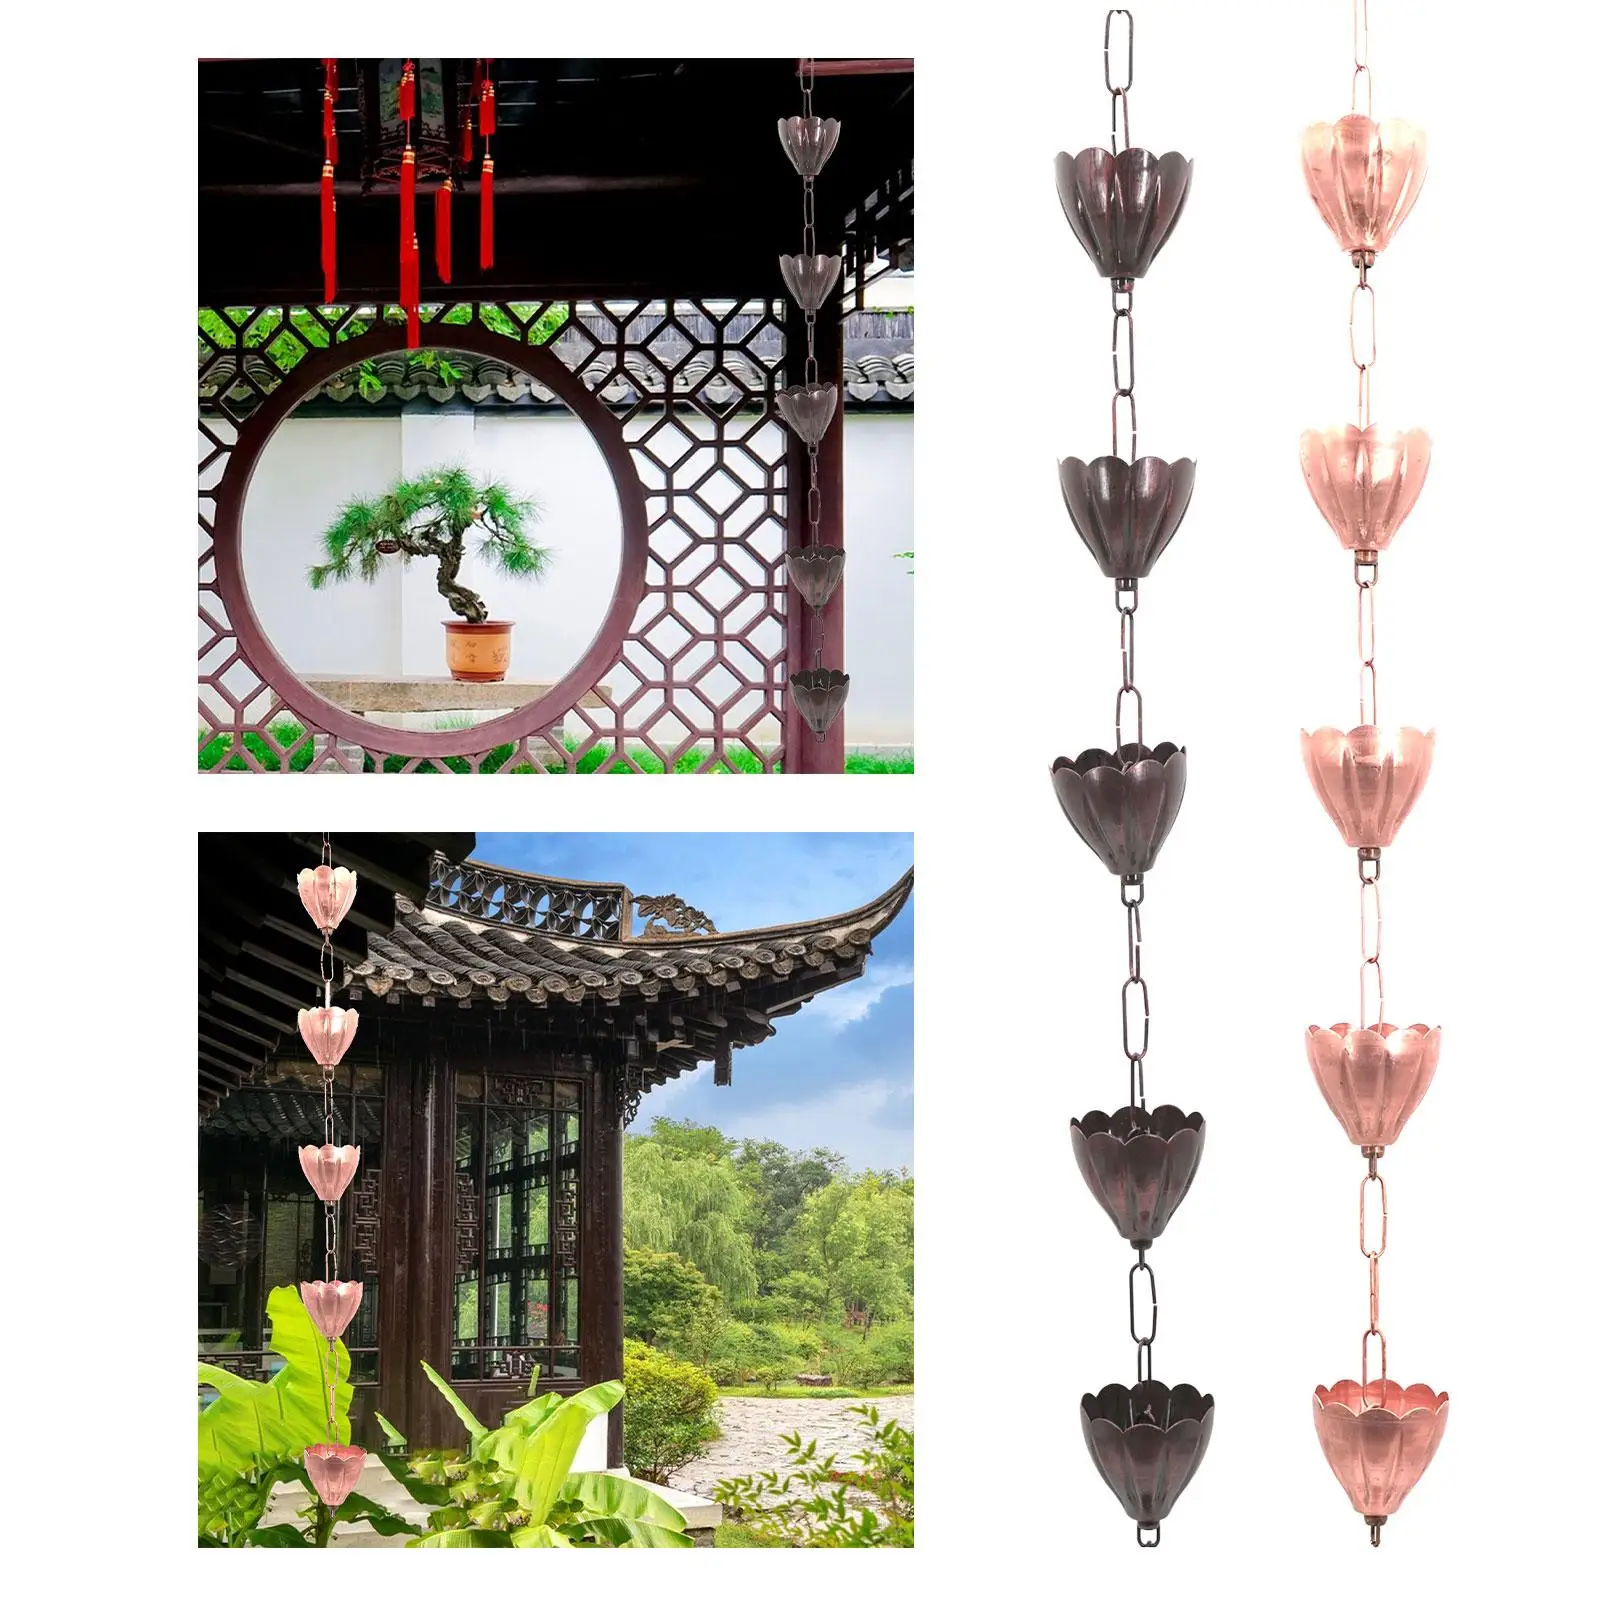 Rain Chains Rain Chain Cups Functional for Gutters with Adapter Display Metal Rain Chain for Roofs Awnings Outdoor Gazebos Home